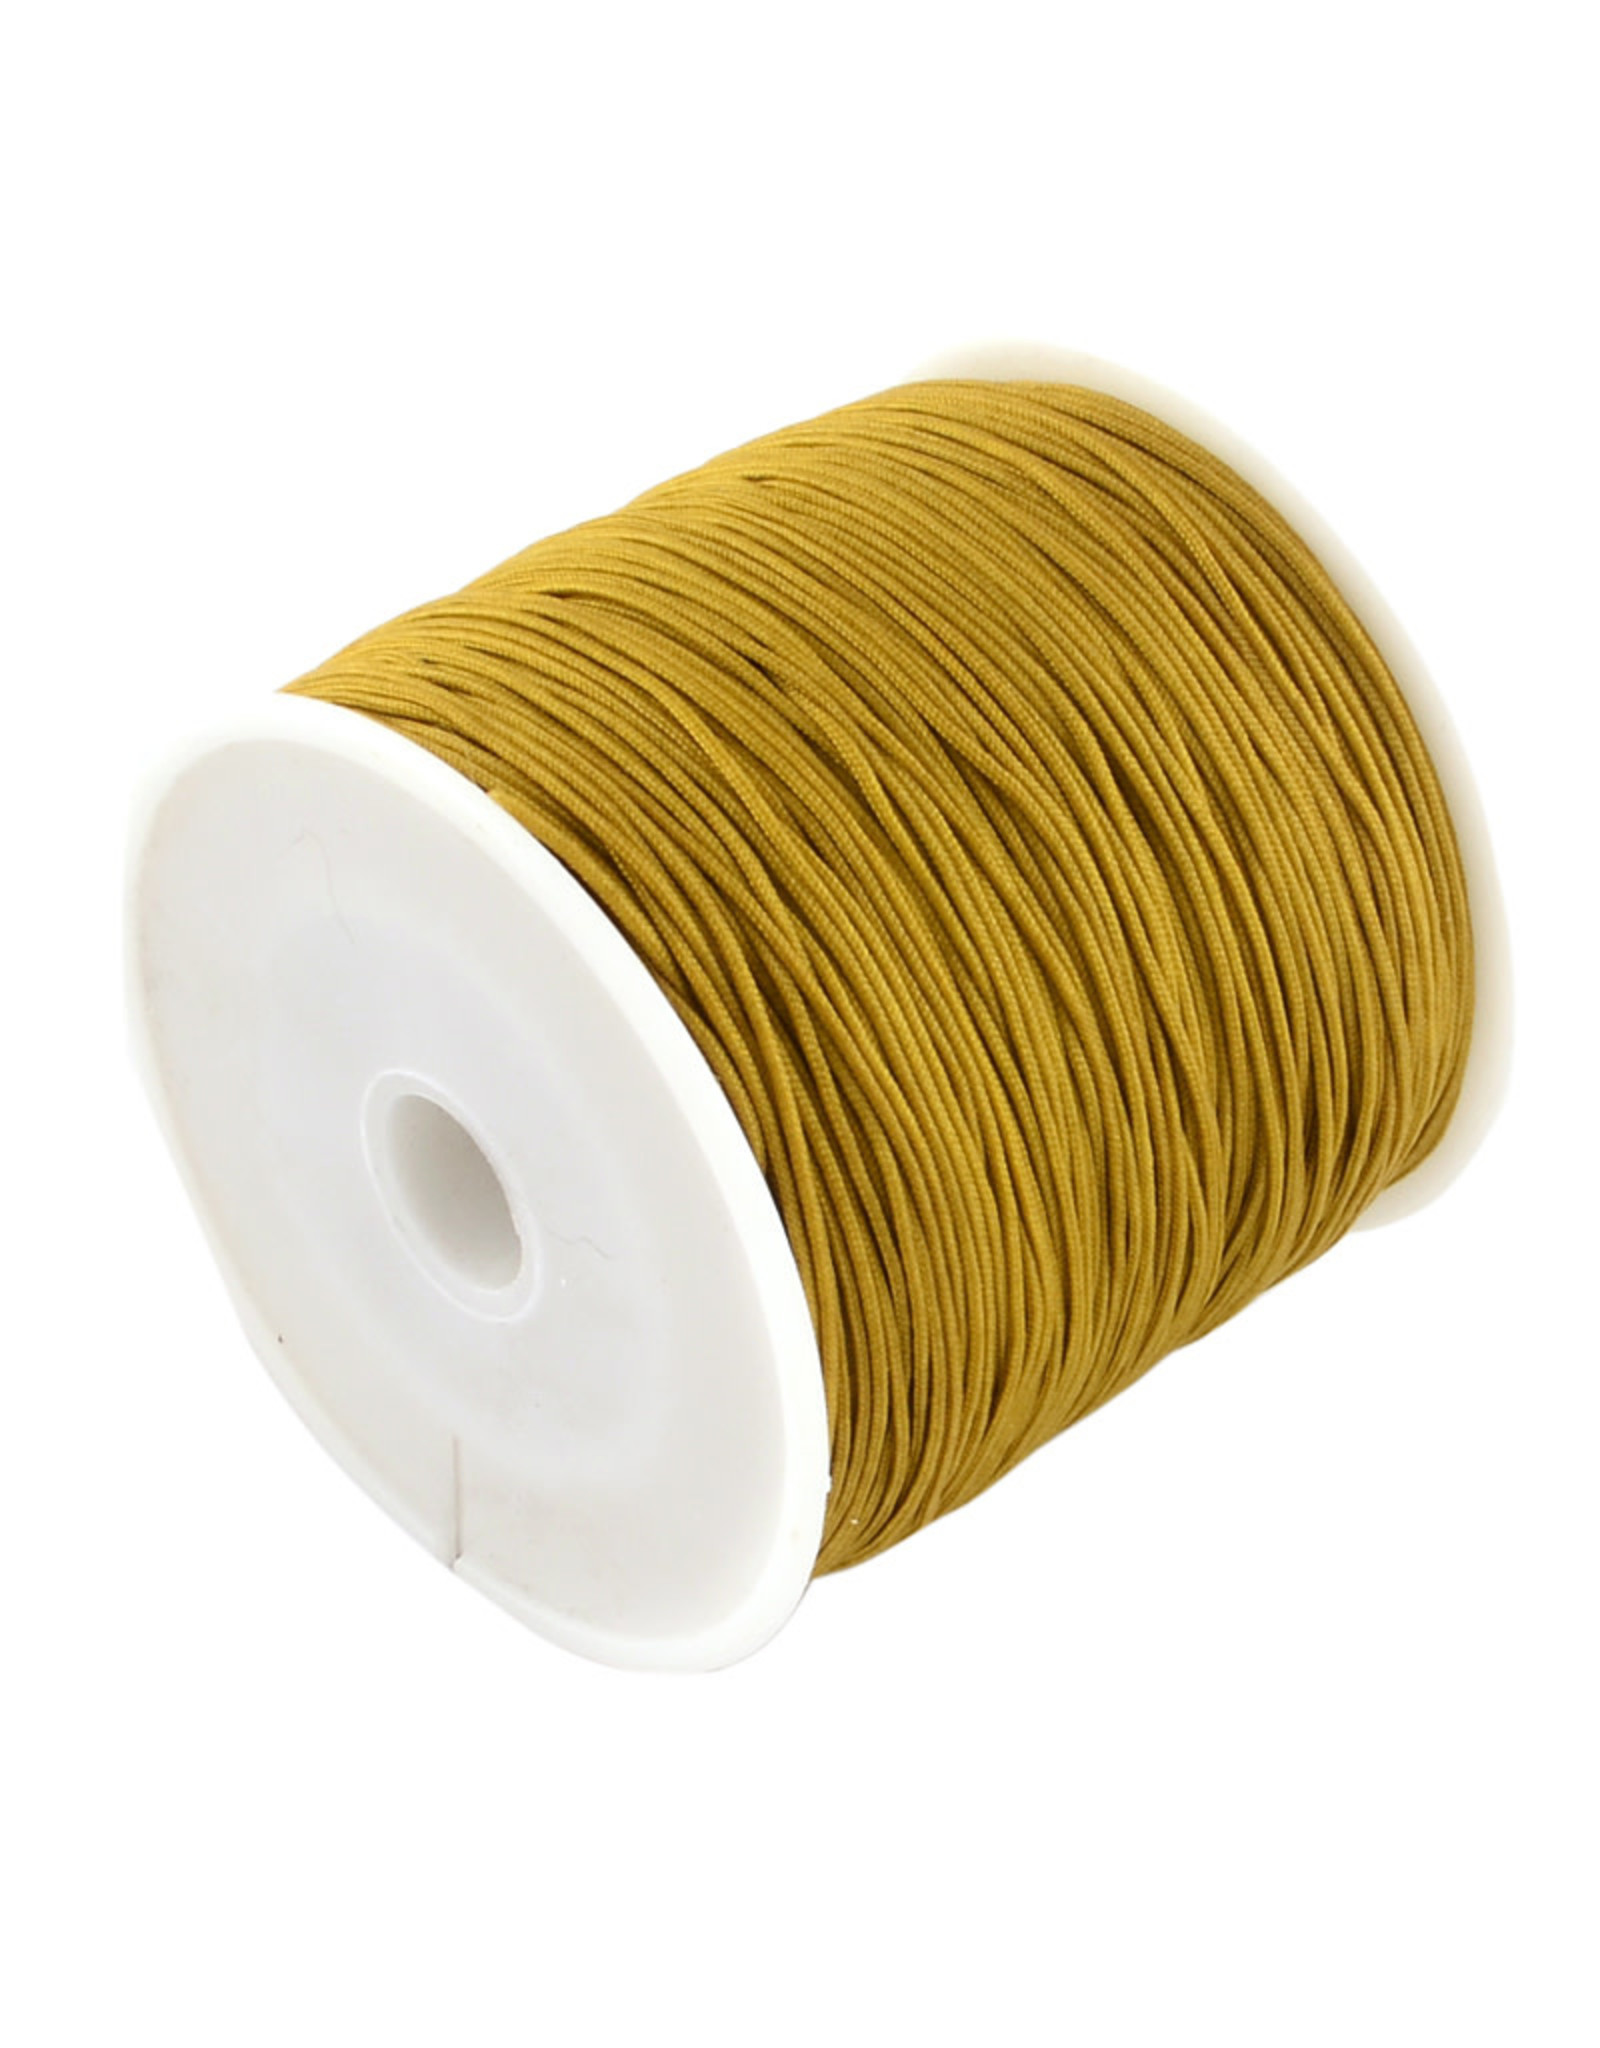 Chinese Knotting Cord .8mm Goldenrod Yellow  x100y